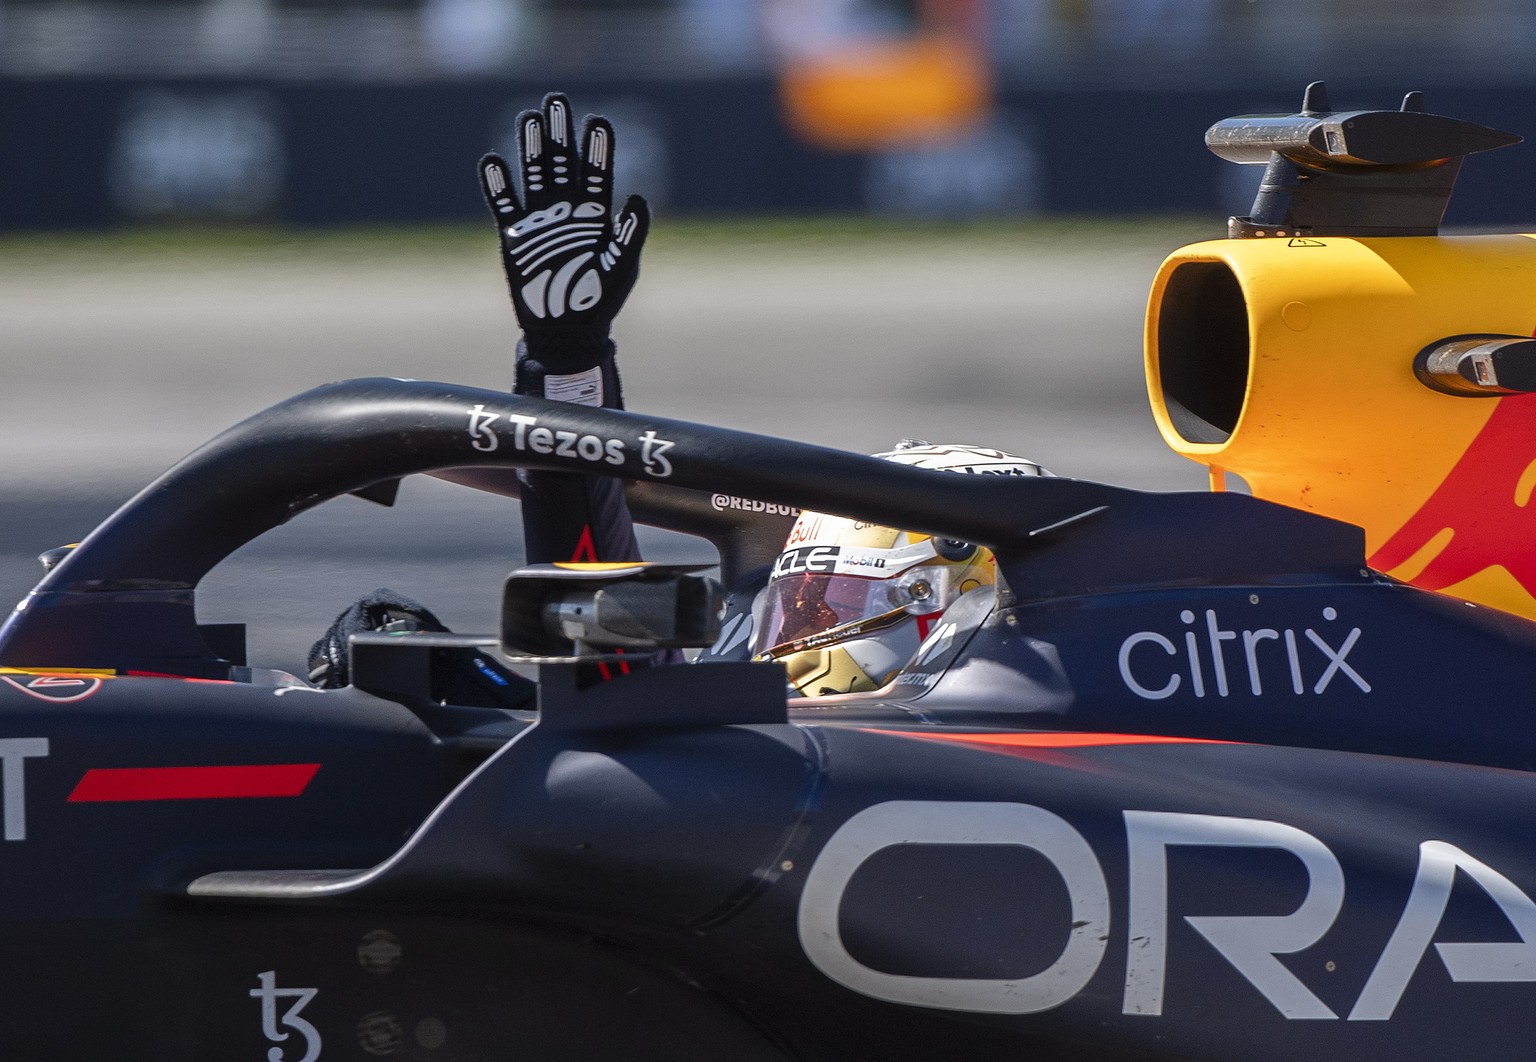 Red Bull driver Max Verstappen, of the Netherlands, waves to the crowd after winning the Canadian Grand Prix auto race in Montreal, Sunday, June 19, 2022. (Graham Hughes/The Canadian Press via AP)